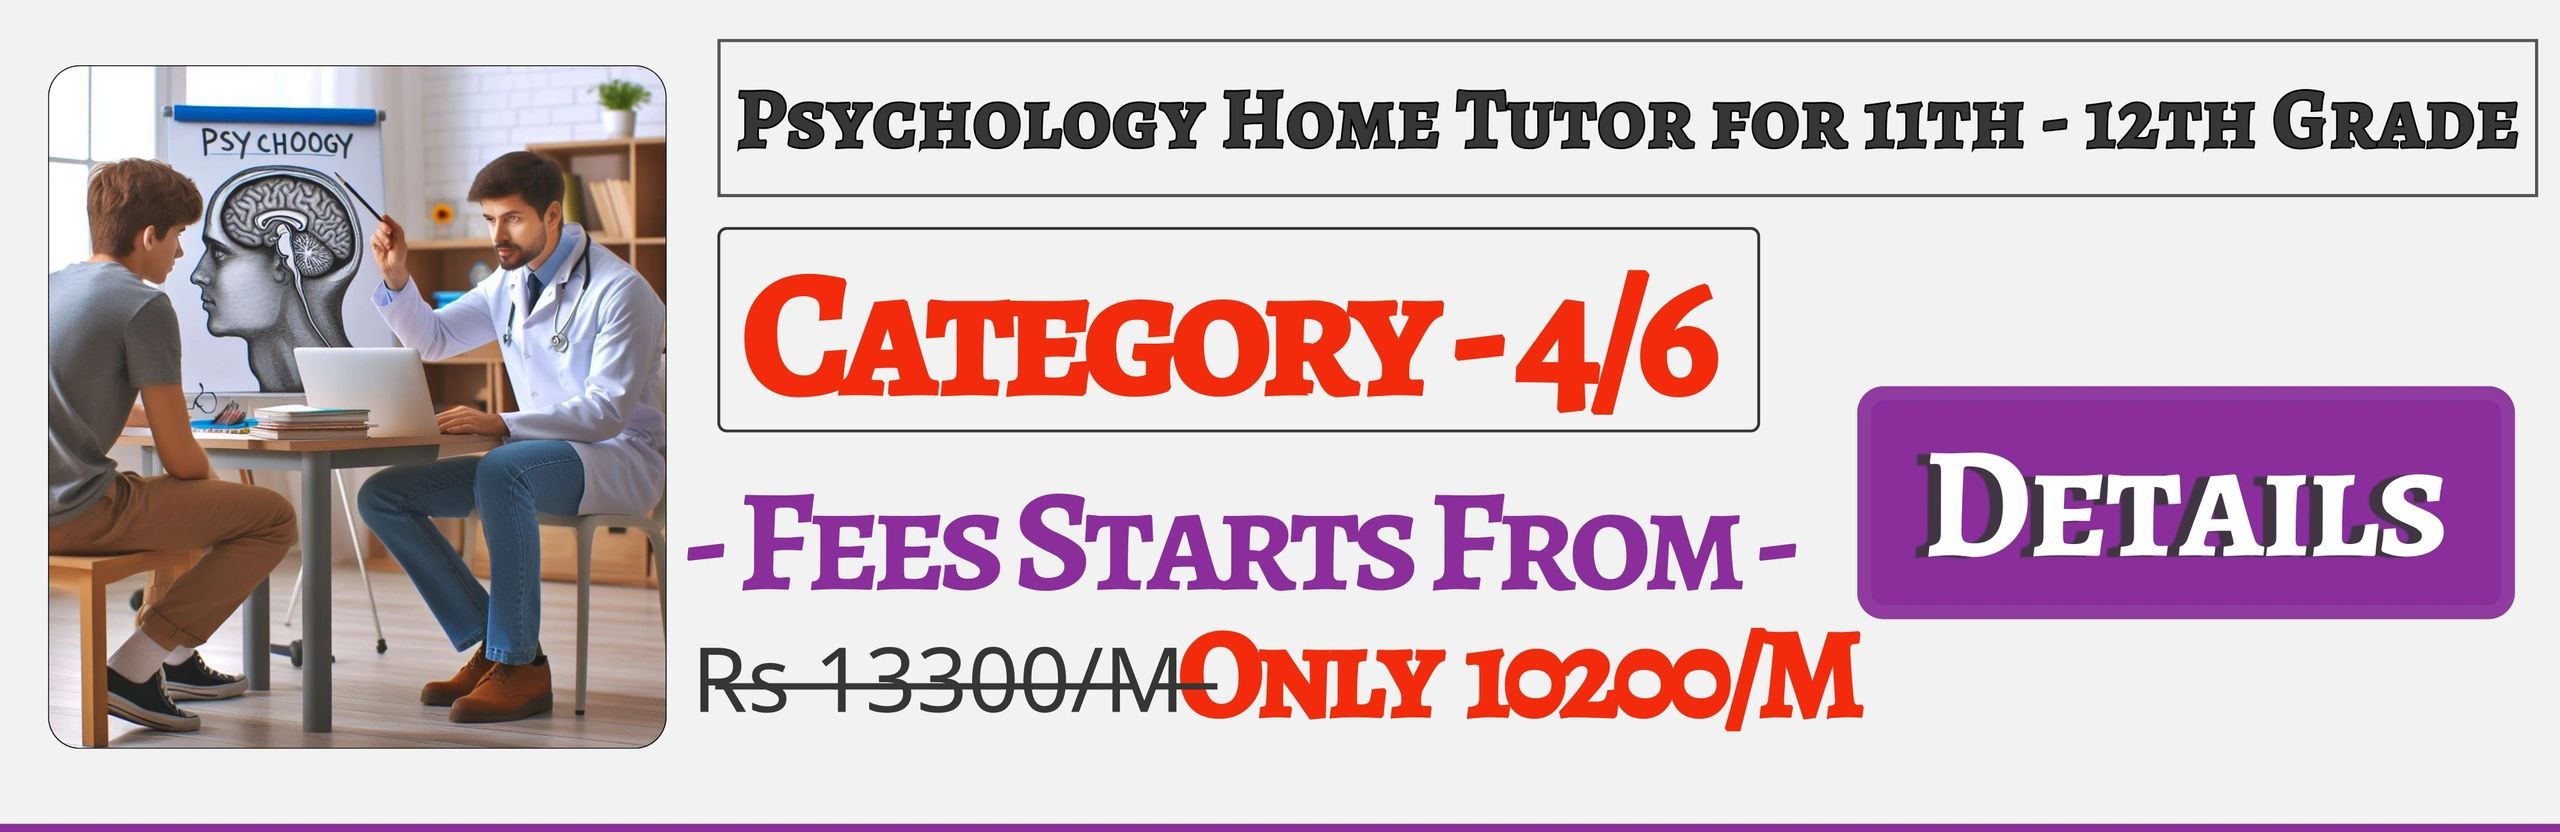 Book Best Nearby Psychology Home Tuition Tutors For 11th & 12th In Jaipur , Fees Only 10200/M